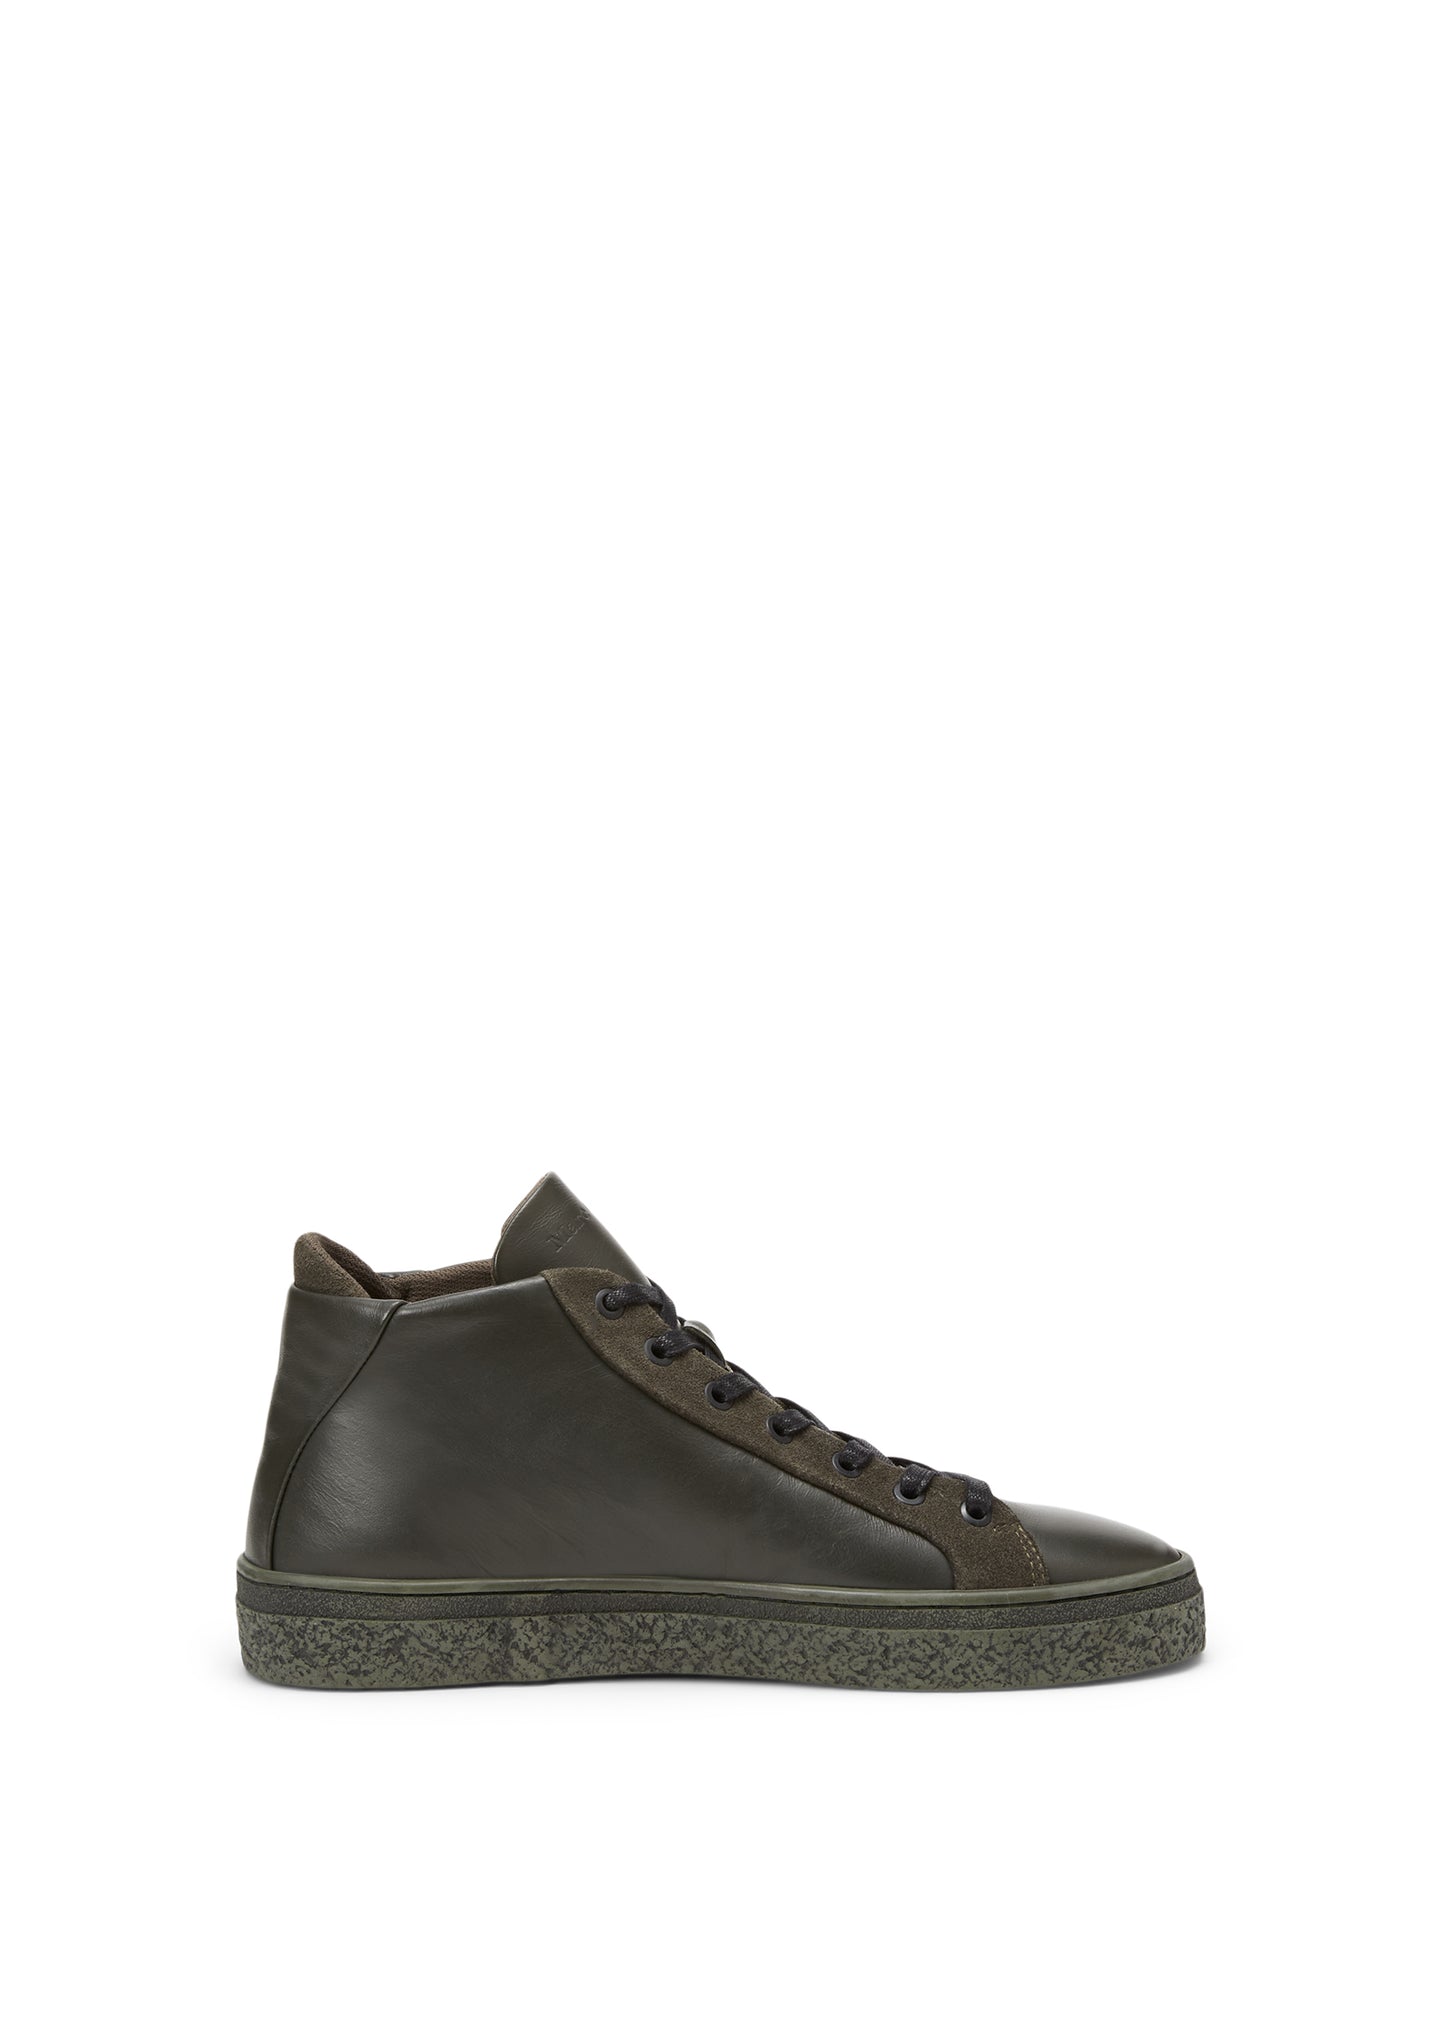 Marc O'Polo Forest Green High-Top Trainer